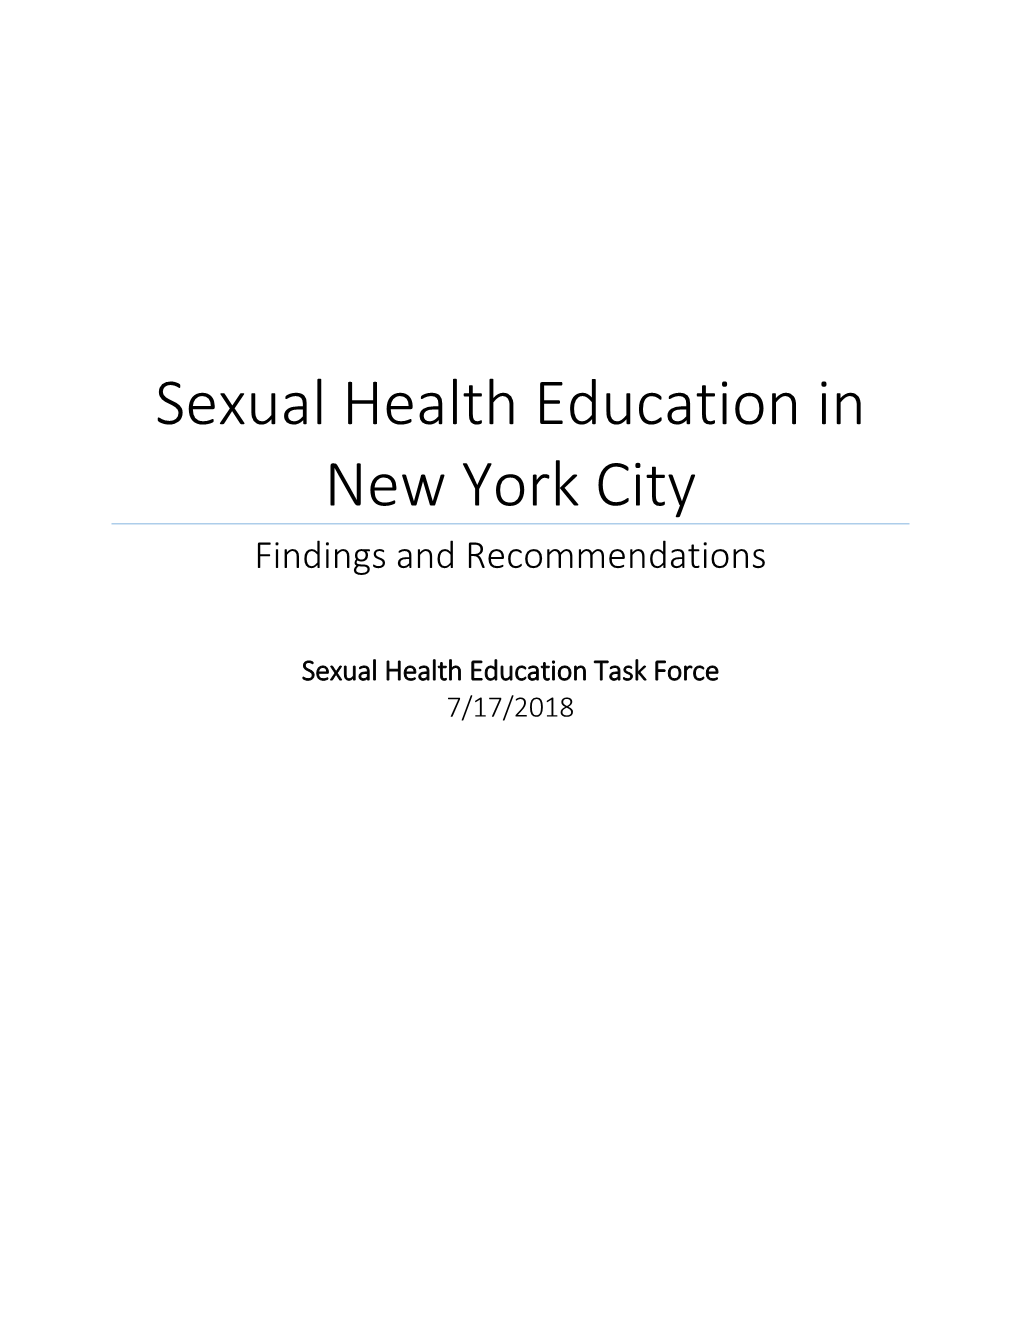 Sexual Health Education in New York City Findings and Recommendations